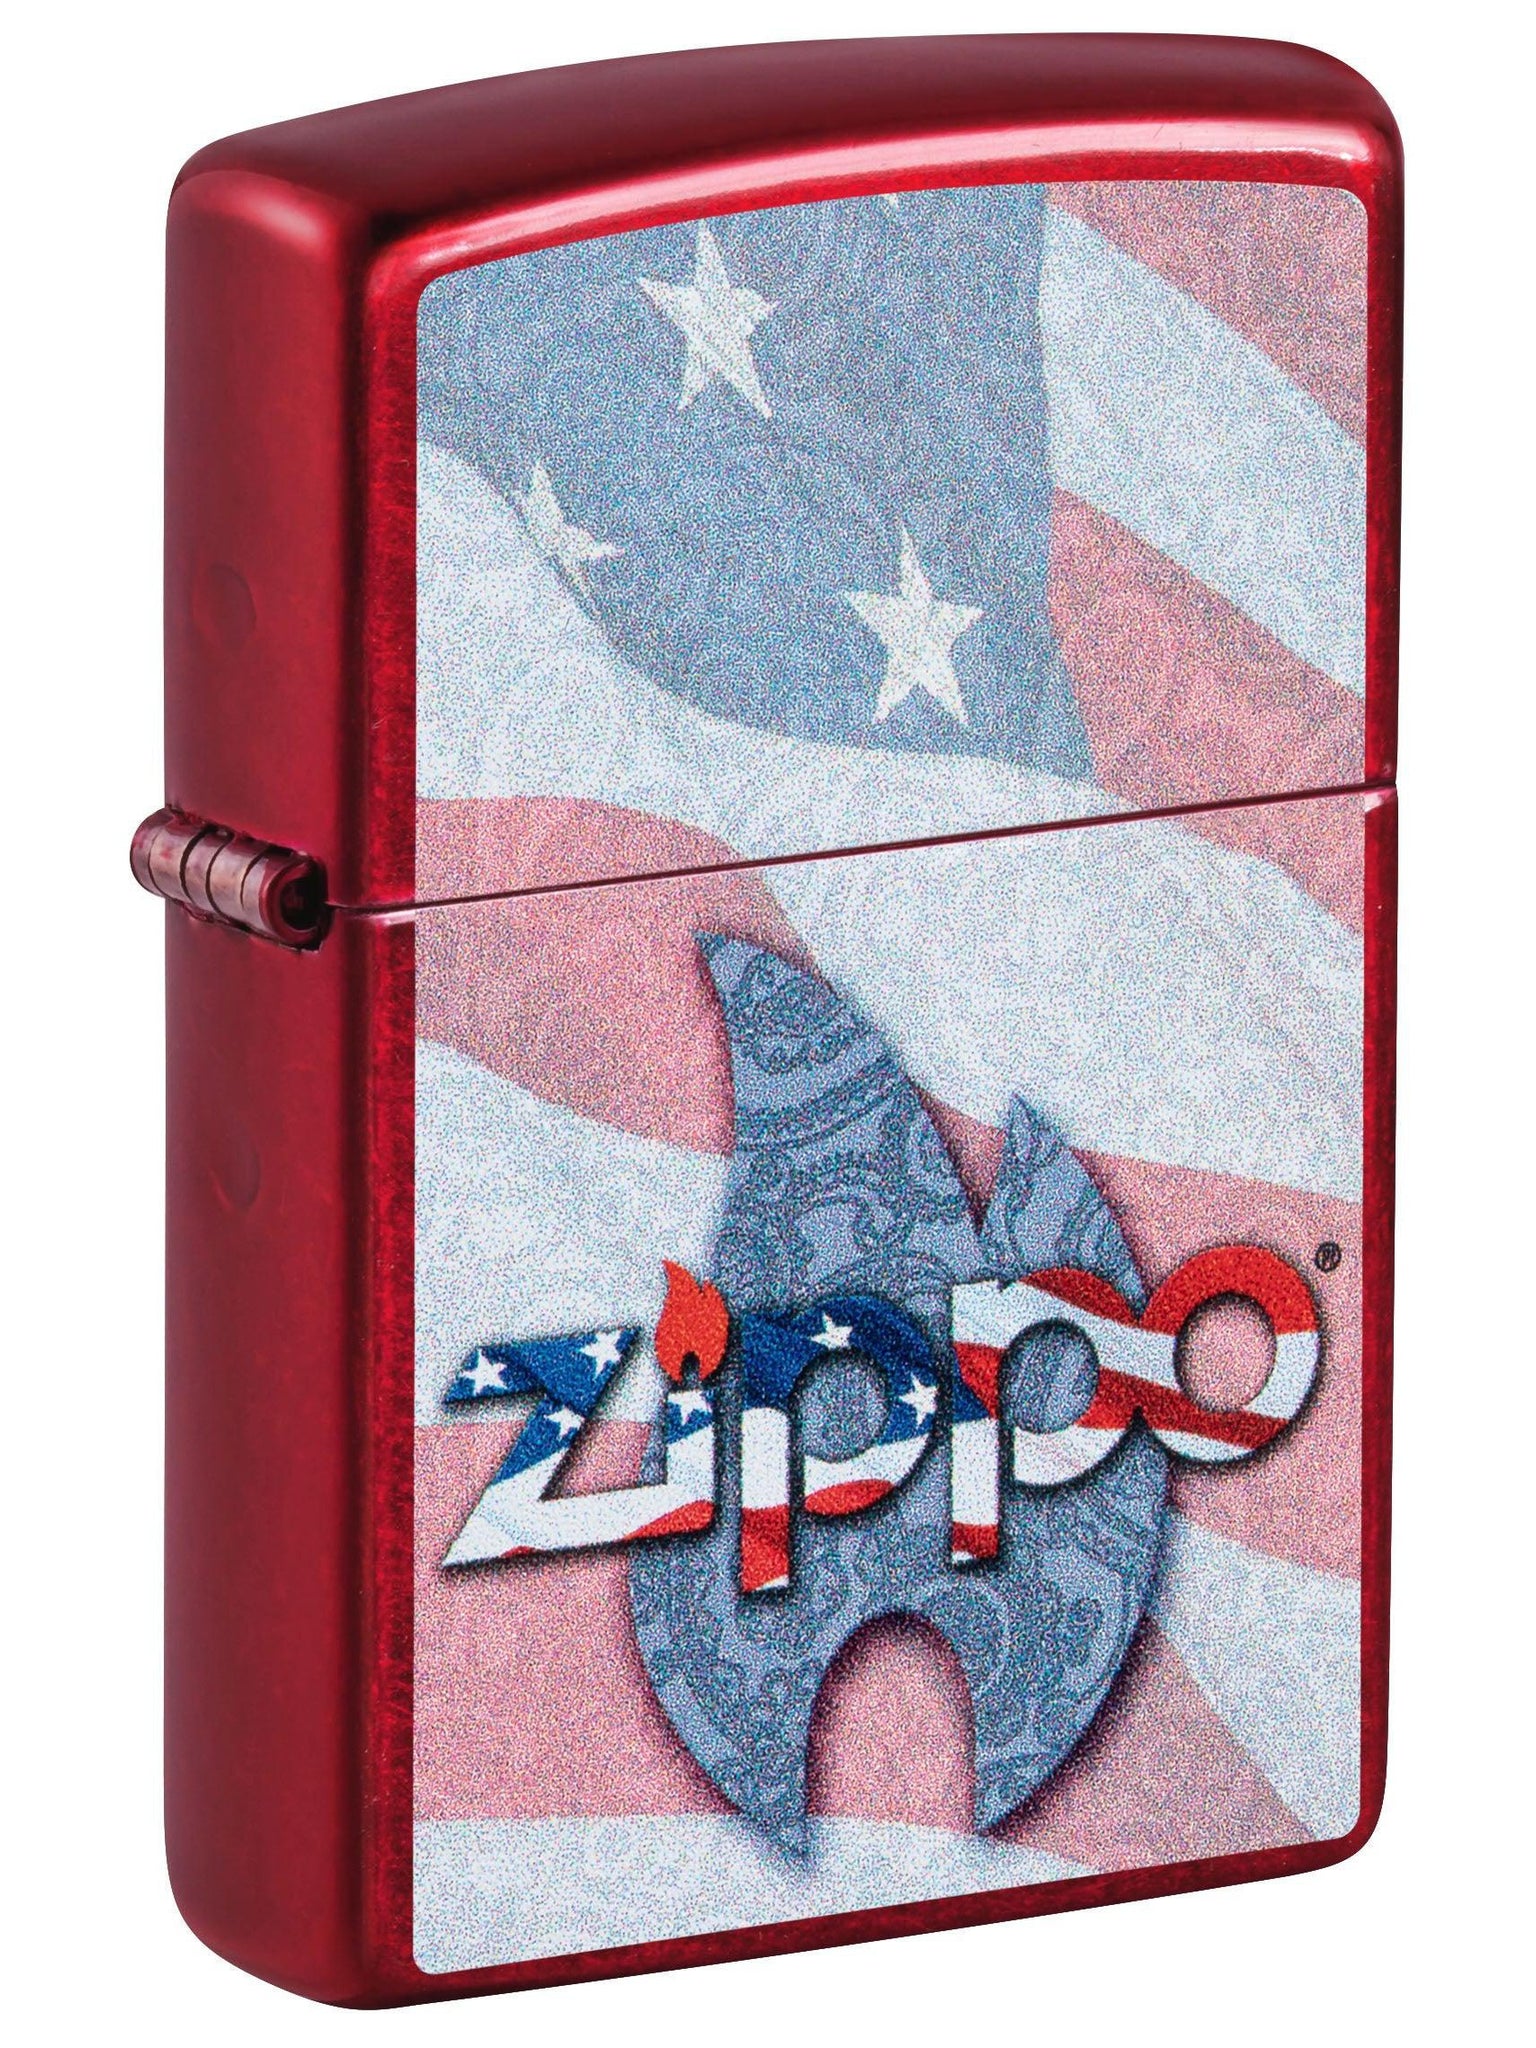 Zippo Lighter: Zippo Logo and American Flag - Candy Apple Red 49781